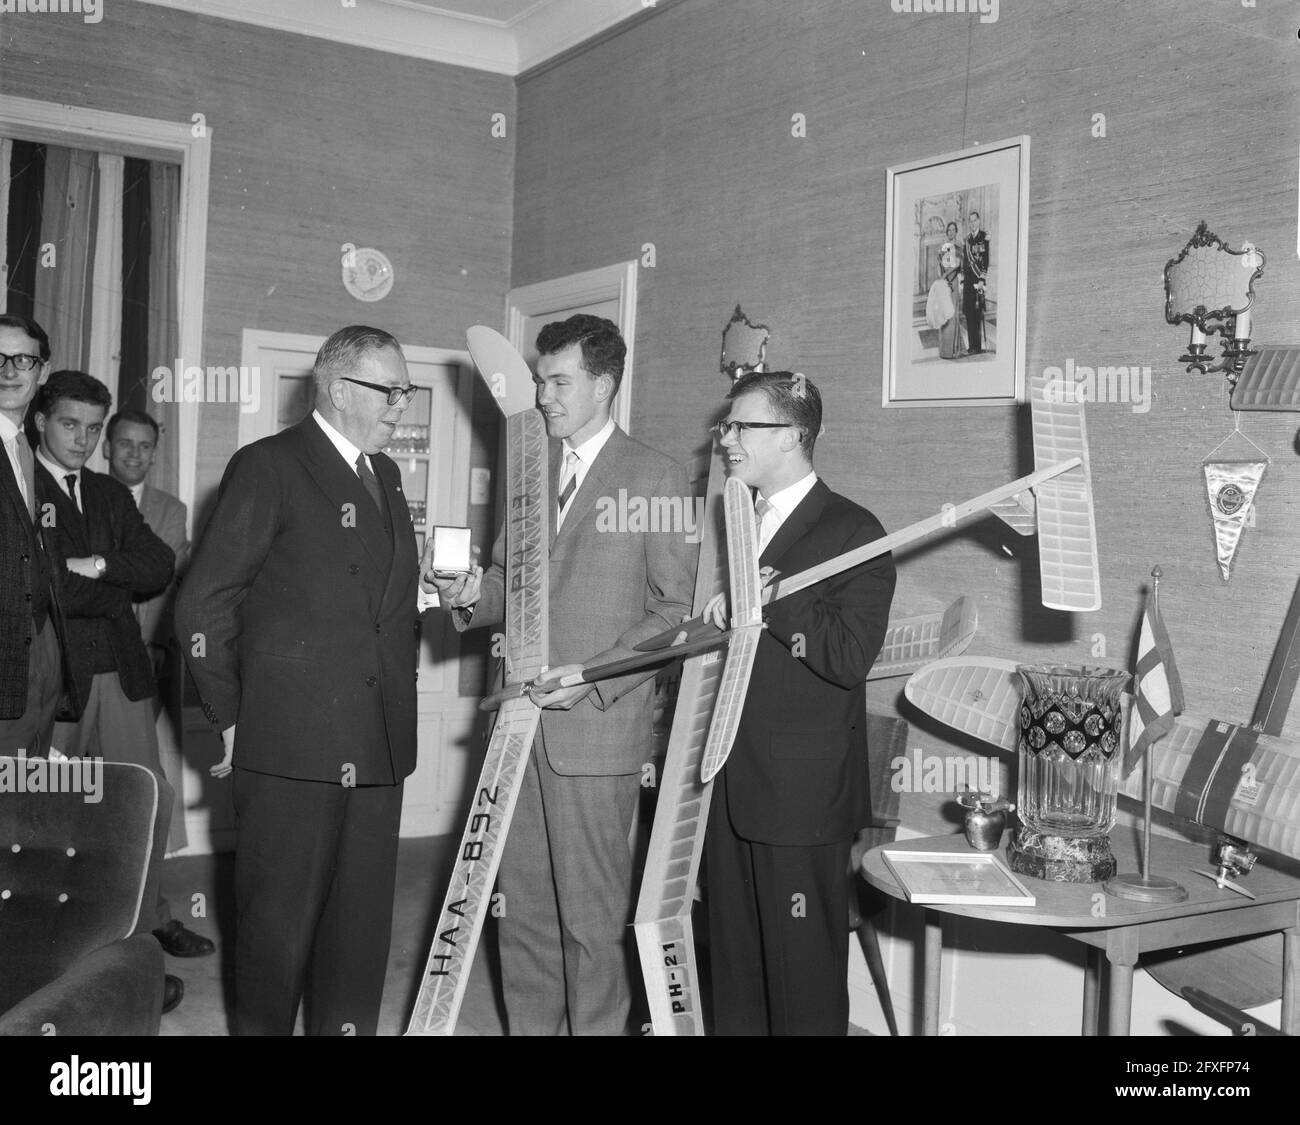 Presentation of prizes to world camp. model airplane builders, 29 November 1961, PRIZES, Presentations, The Netherlands, 20th century press agency photo, news to remember, documentary, historic photography 1945-1990, visual stories, human history of the Twentieth Century, capturing moments in time Stock Photo